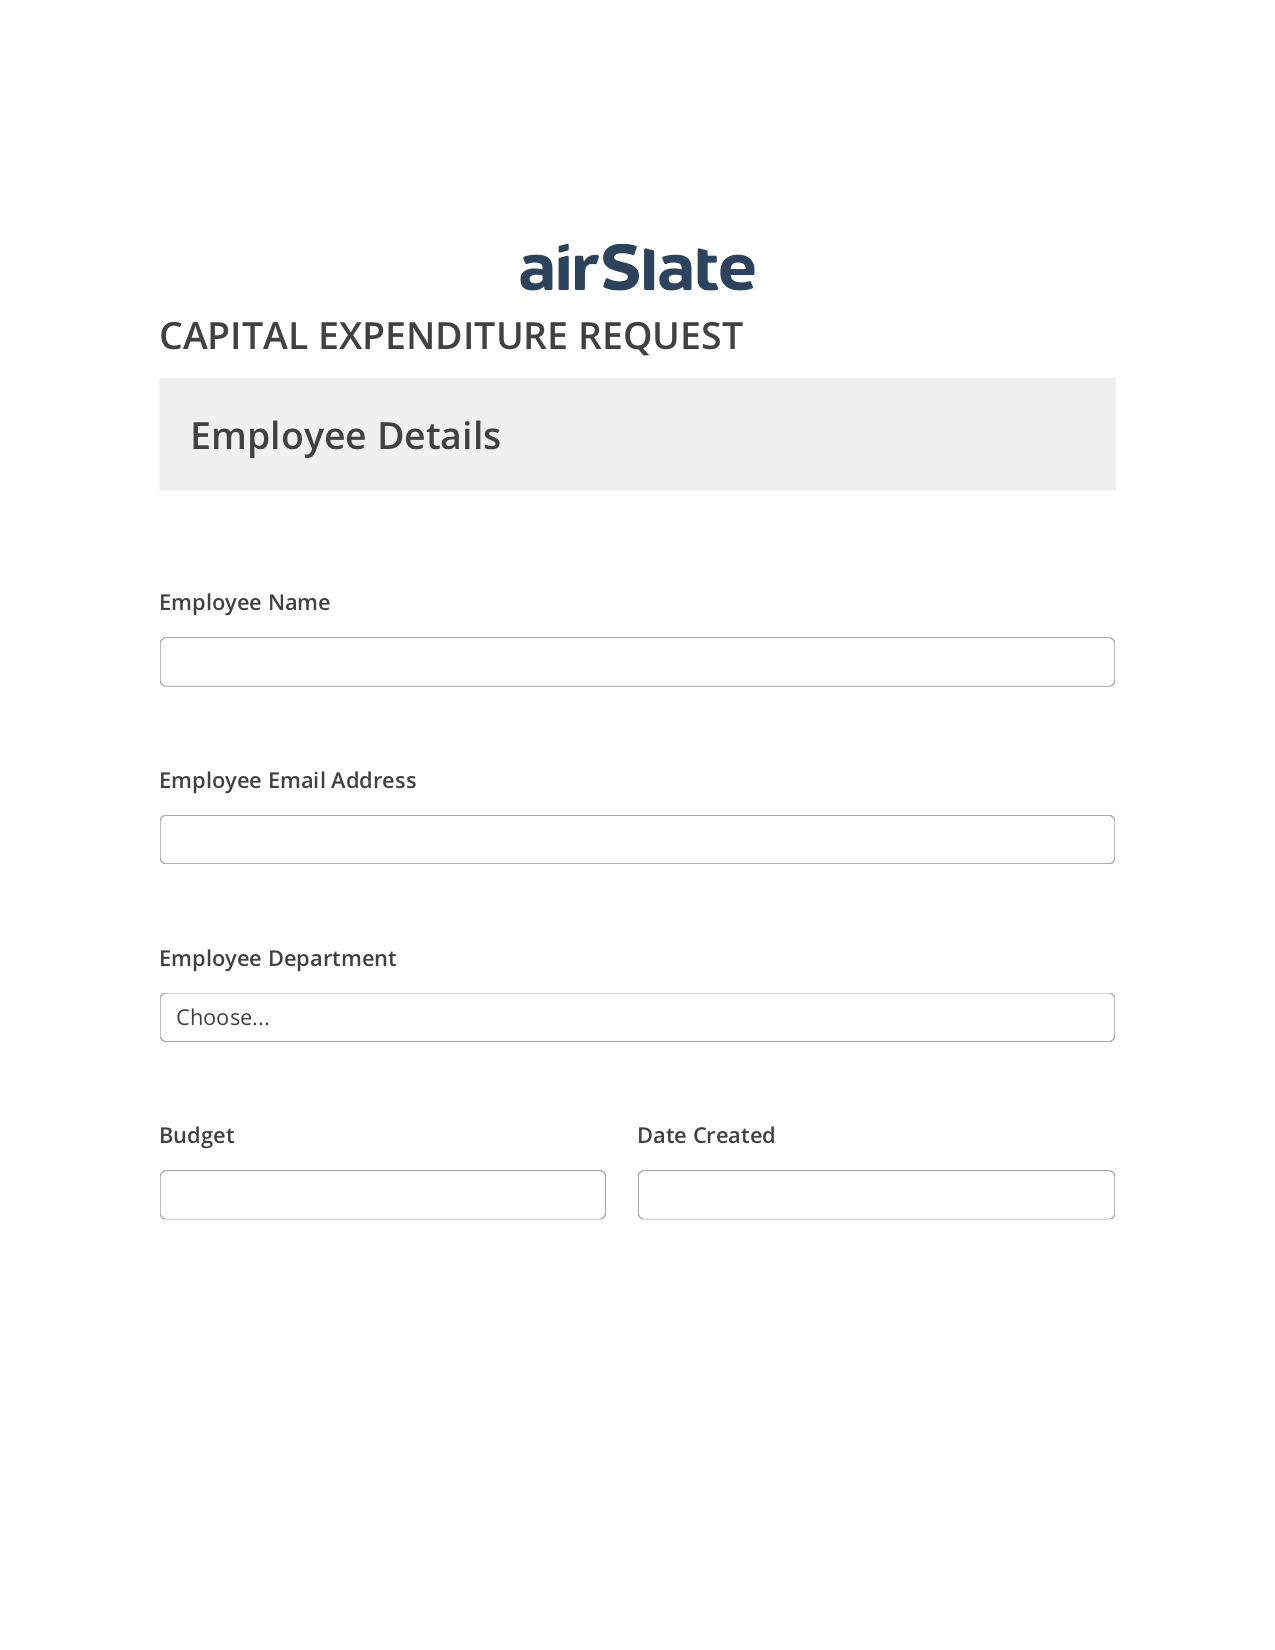 Capital Expenditure Request Approval Workflow Prefill from NetSuite records, Lock the Slate Bot, Export to NetSuite